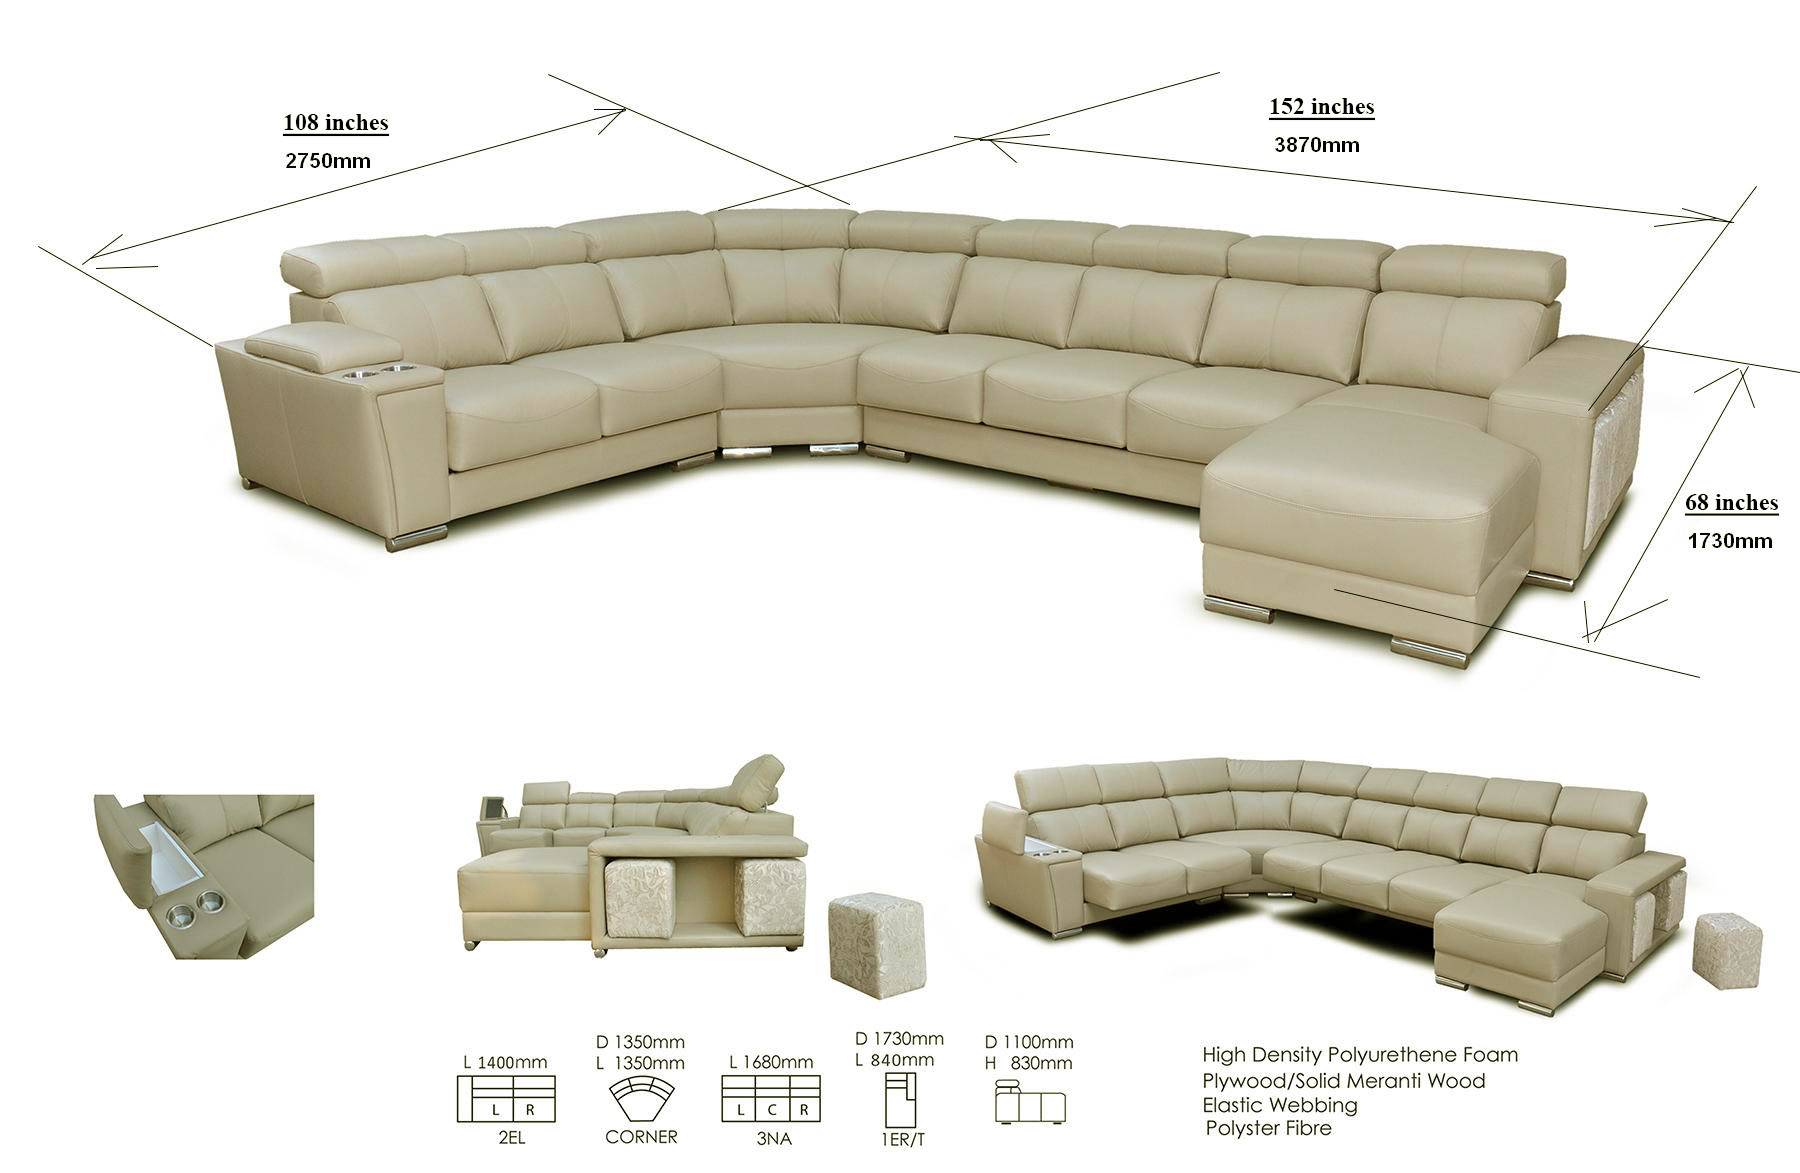 Cream Italian Leather Extra Large Sectional with Cup Holders